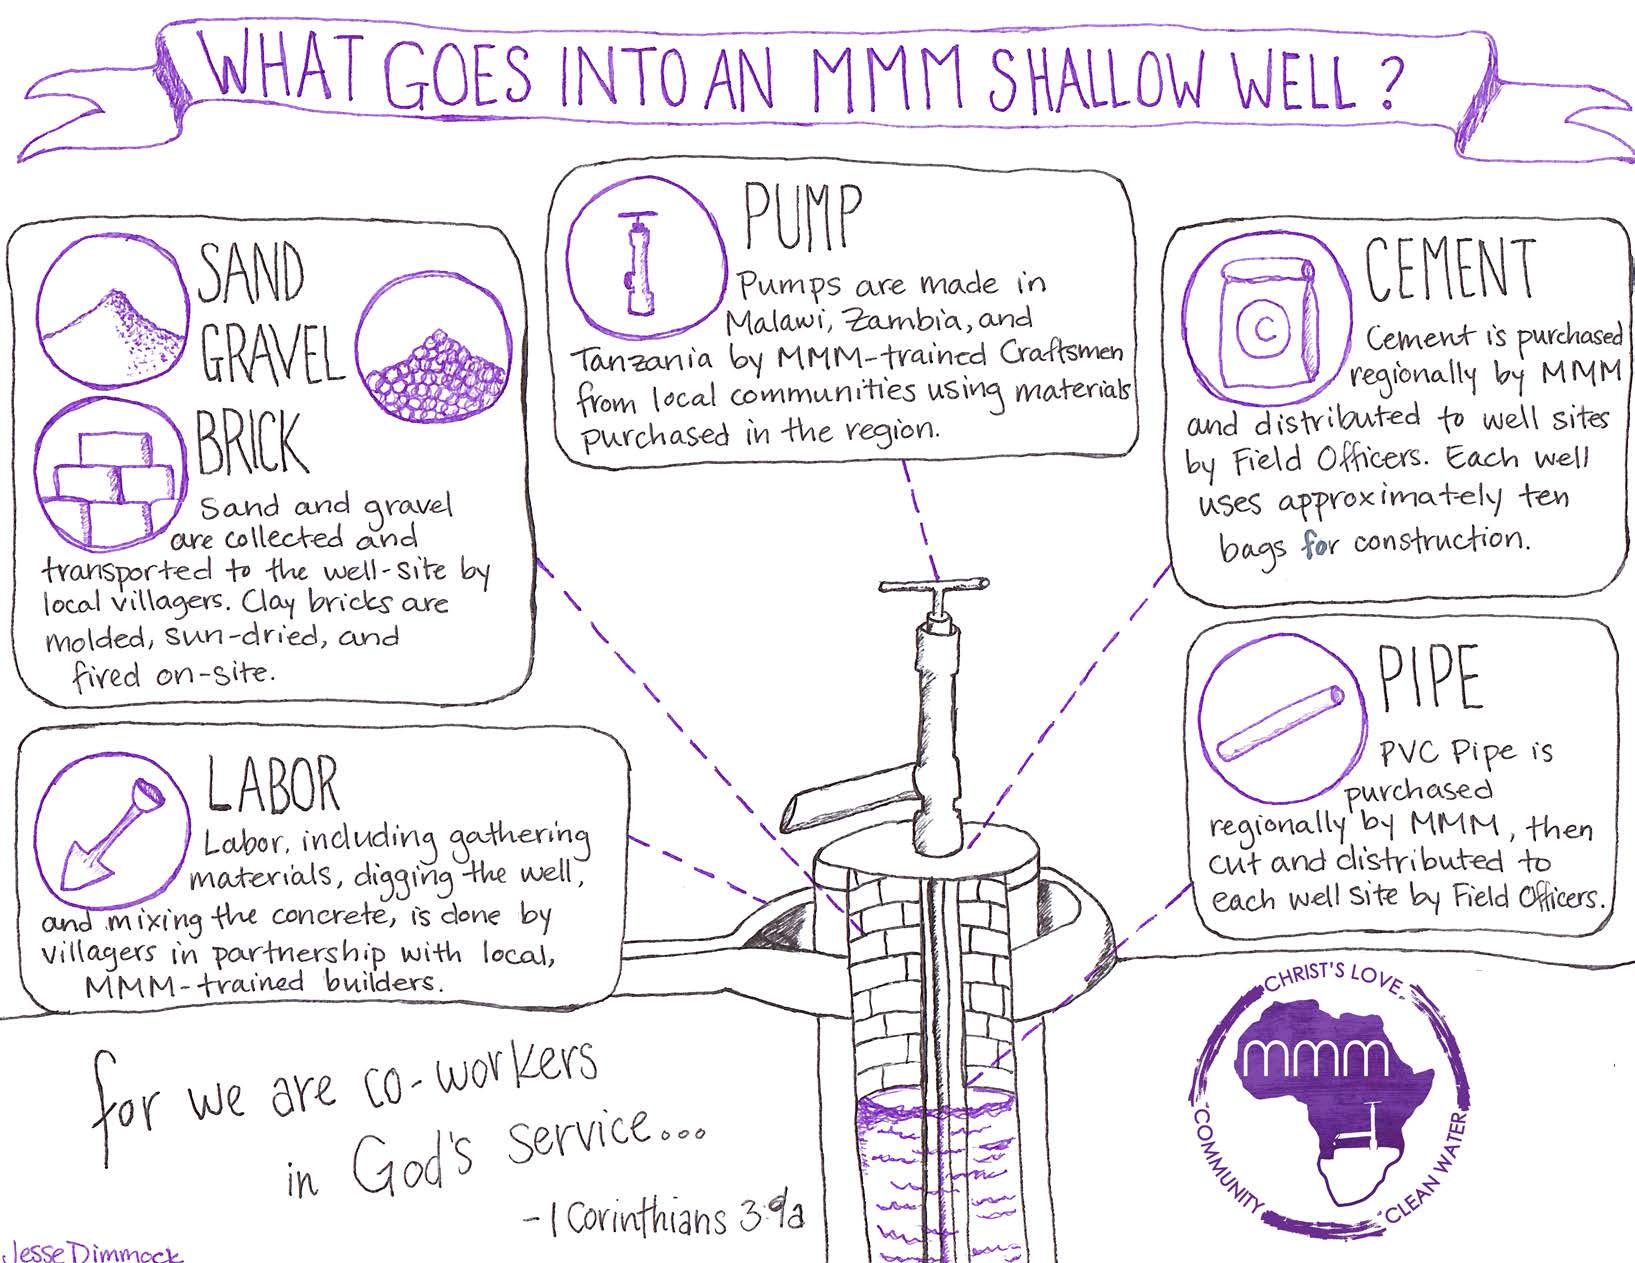 What goes into a shallow well